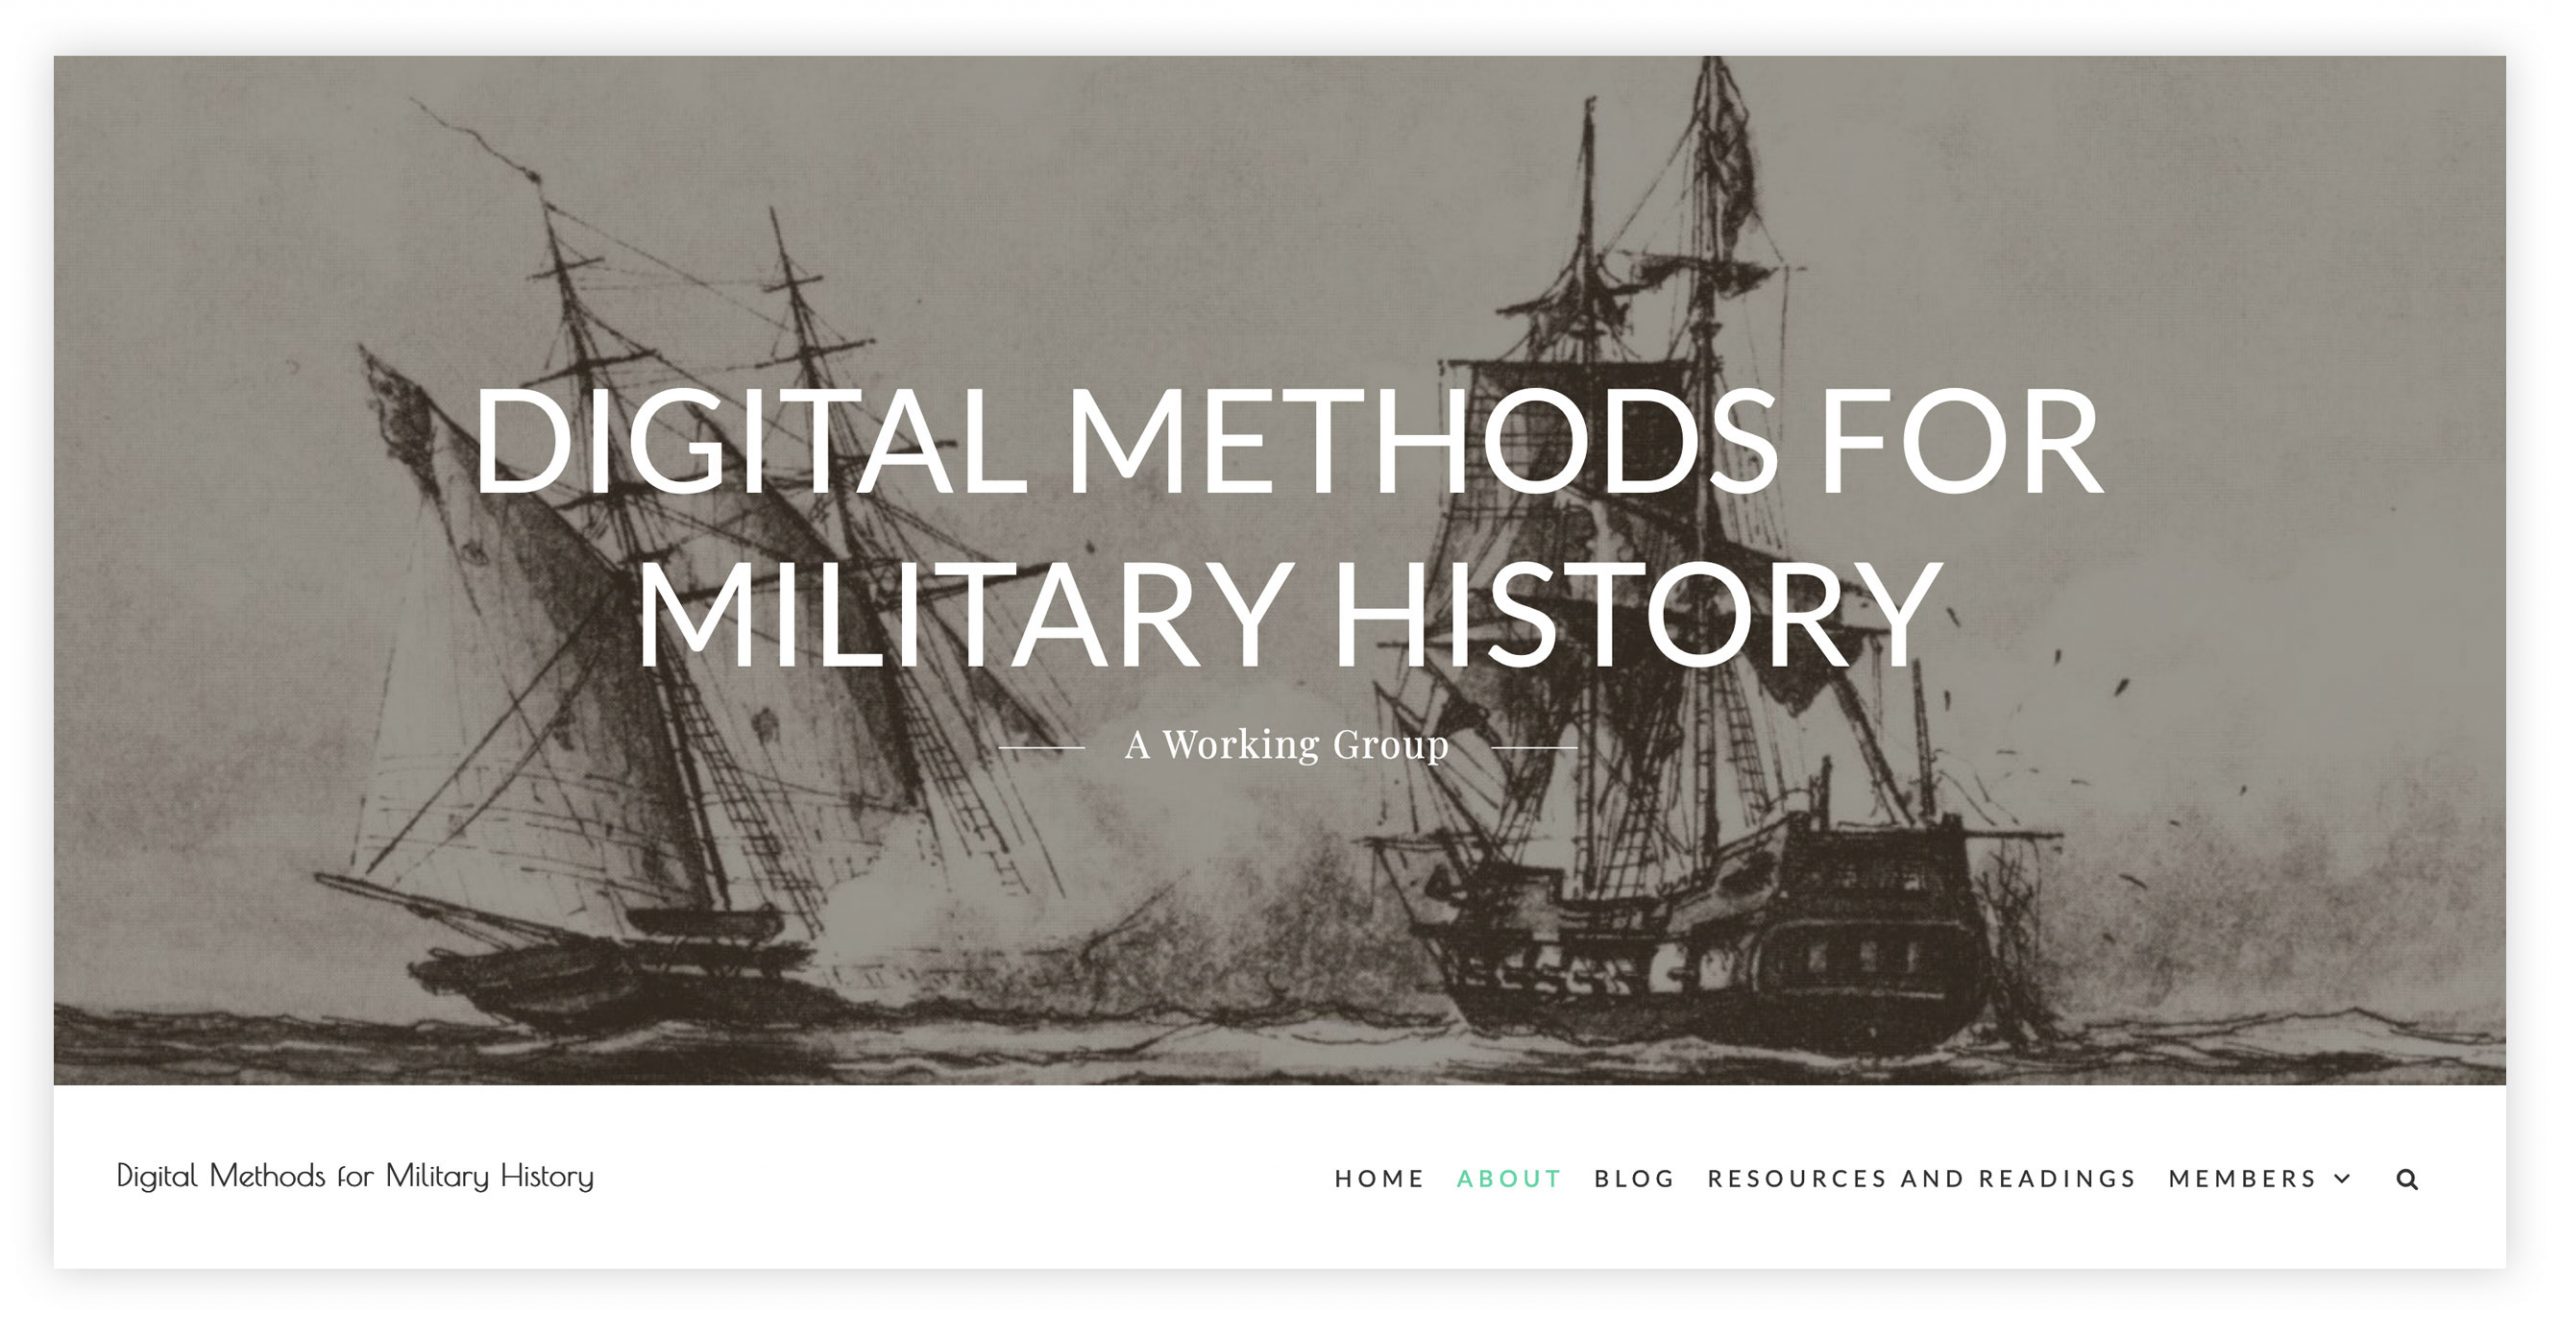 Screengrab of the Digital Methods for Military History website hero image and navigation.